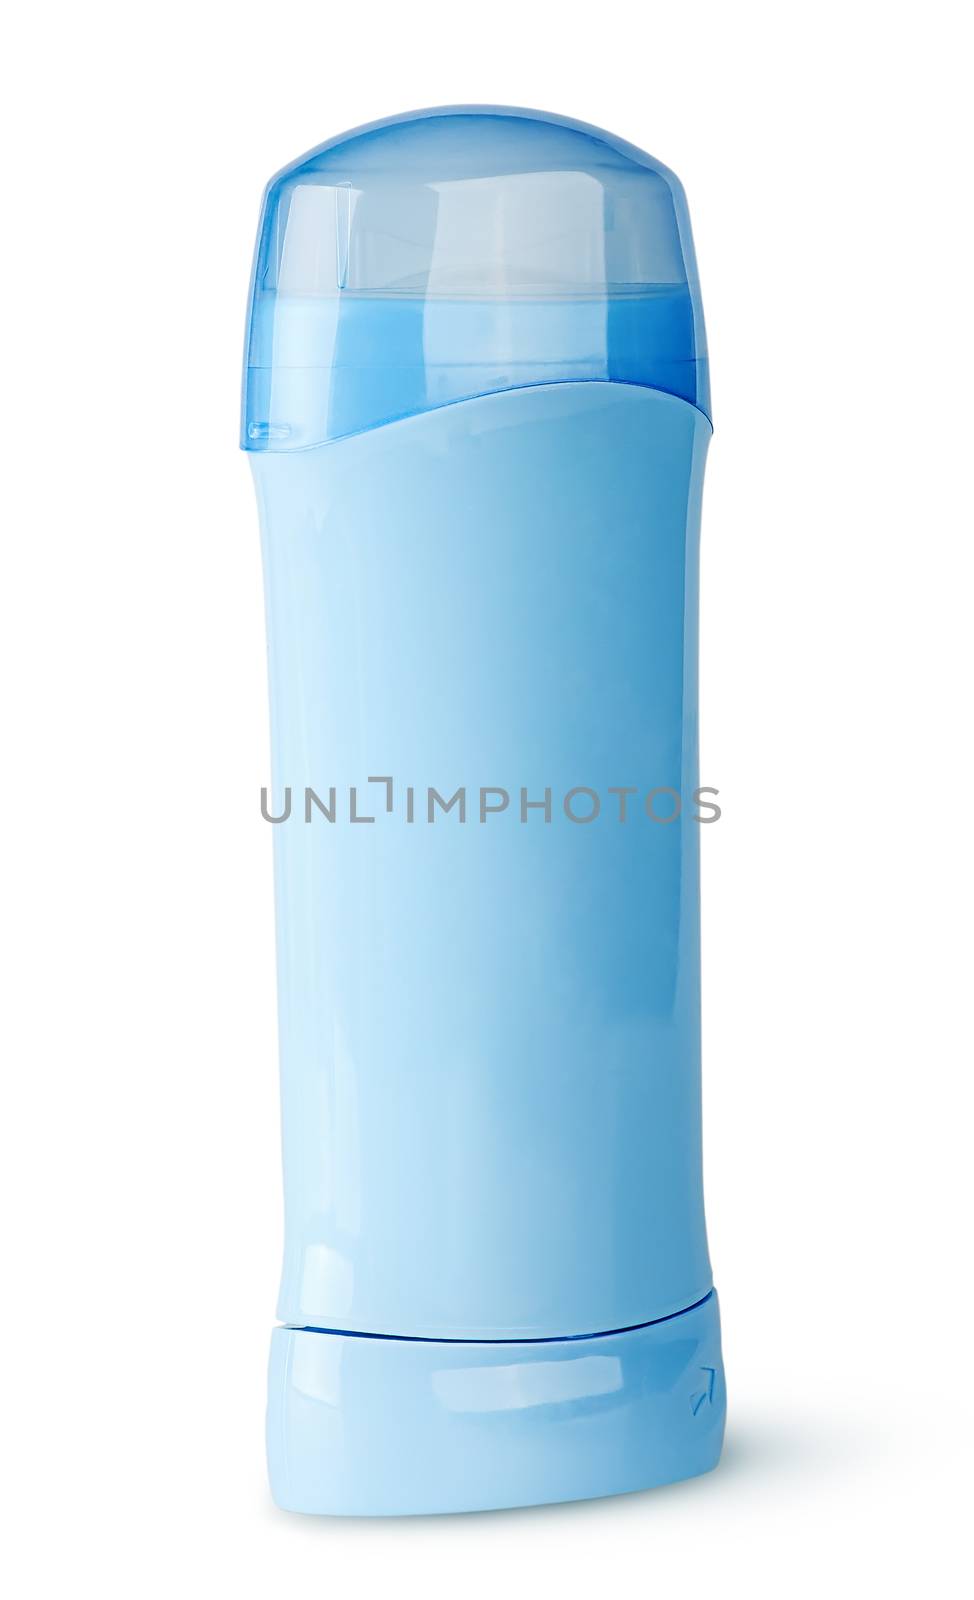 Blue deodorant container rotated isolated on white background